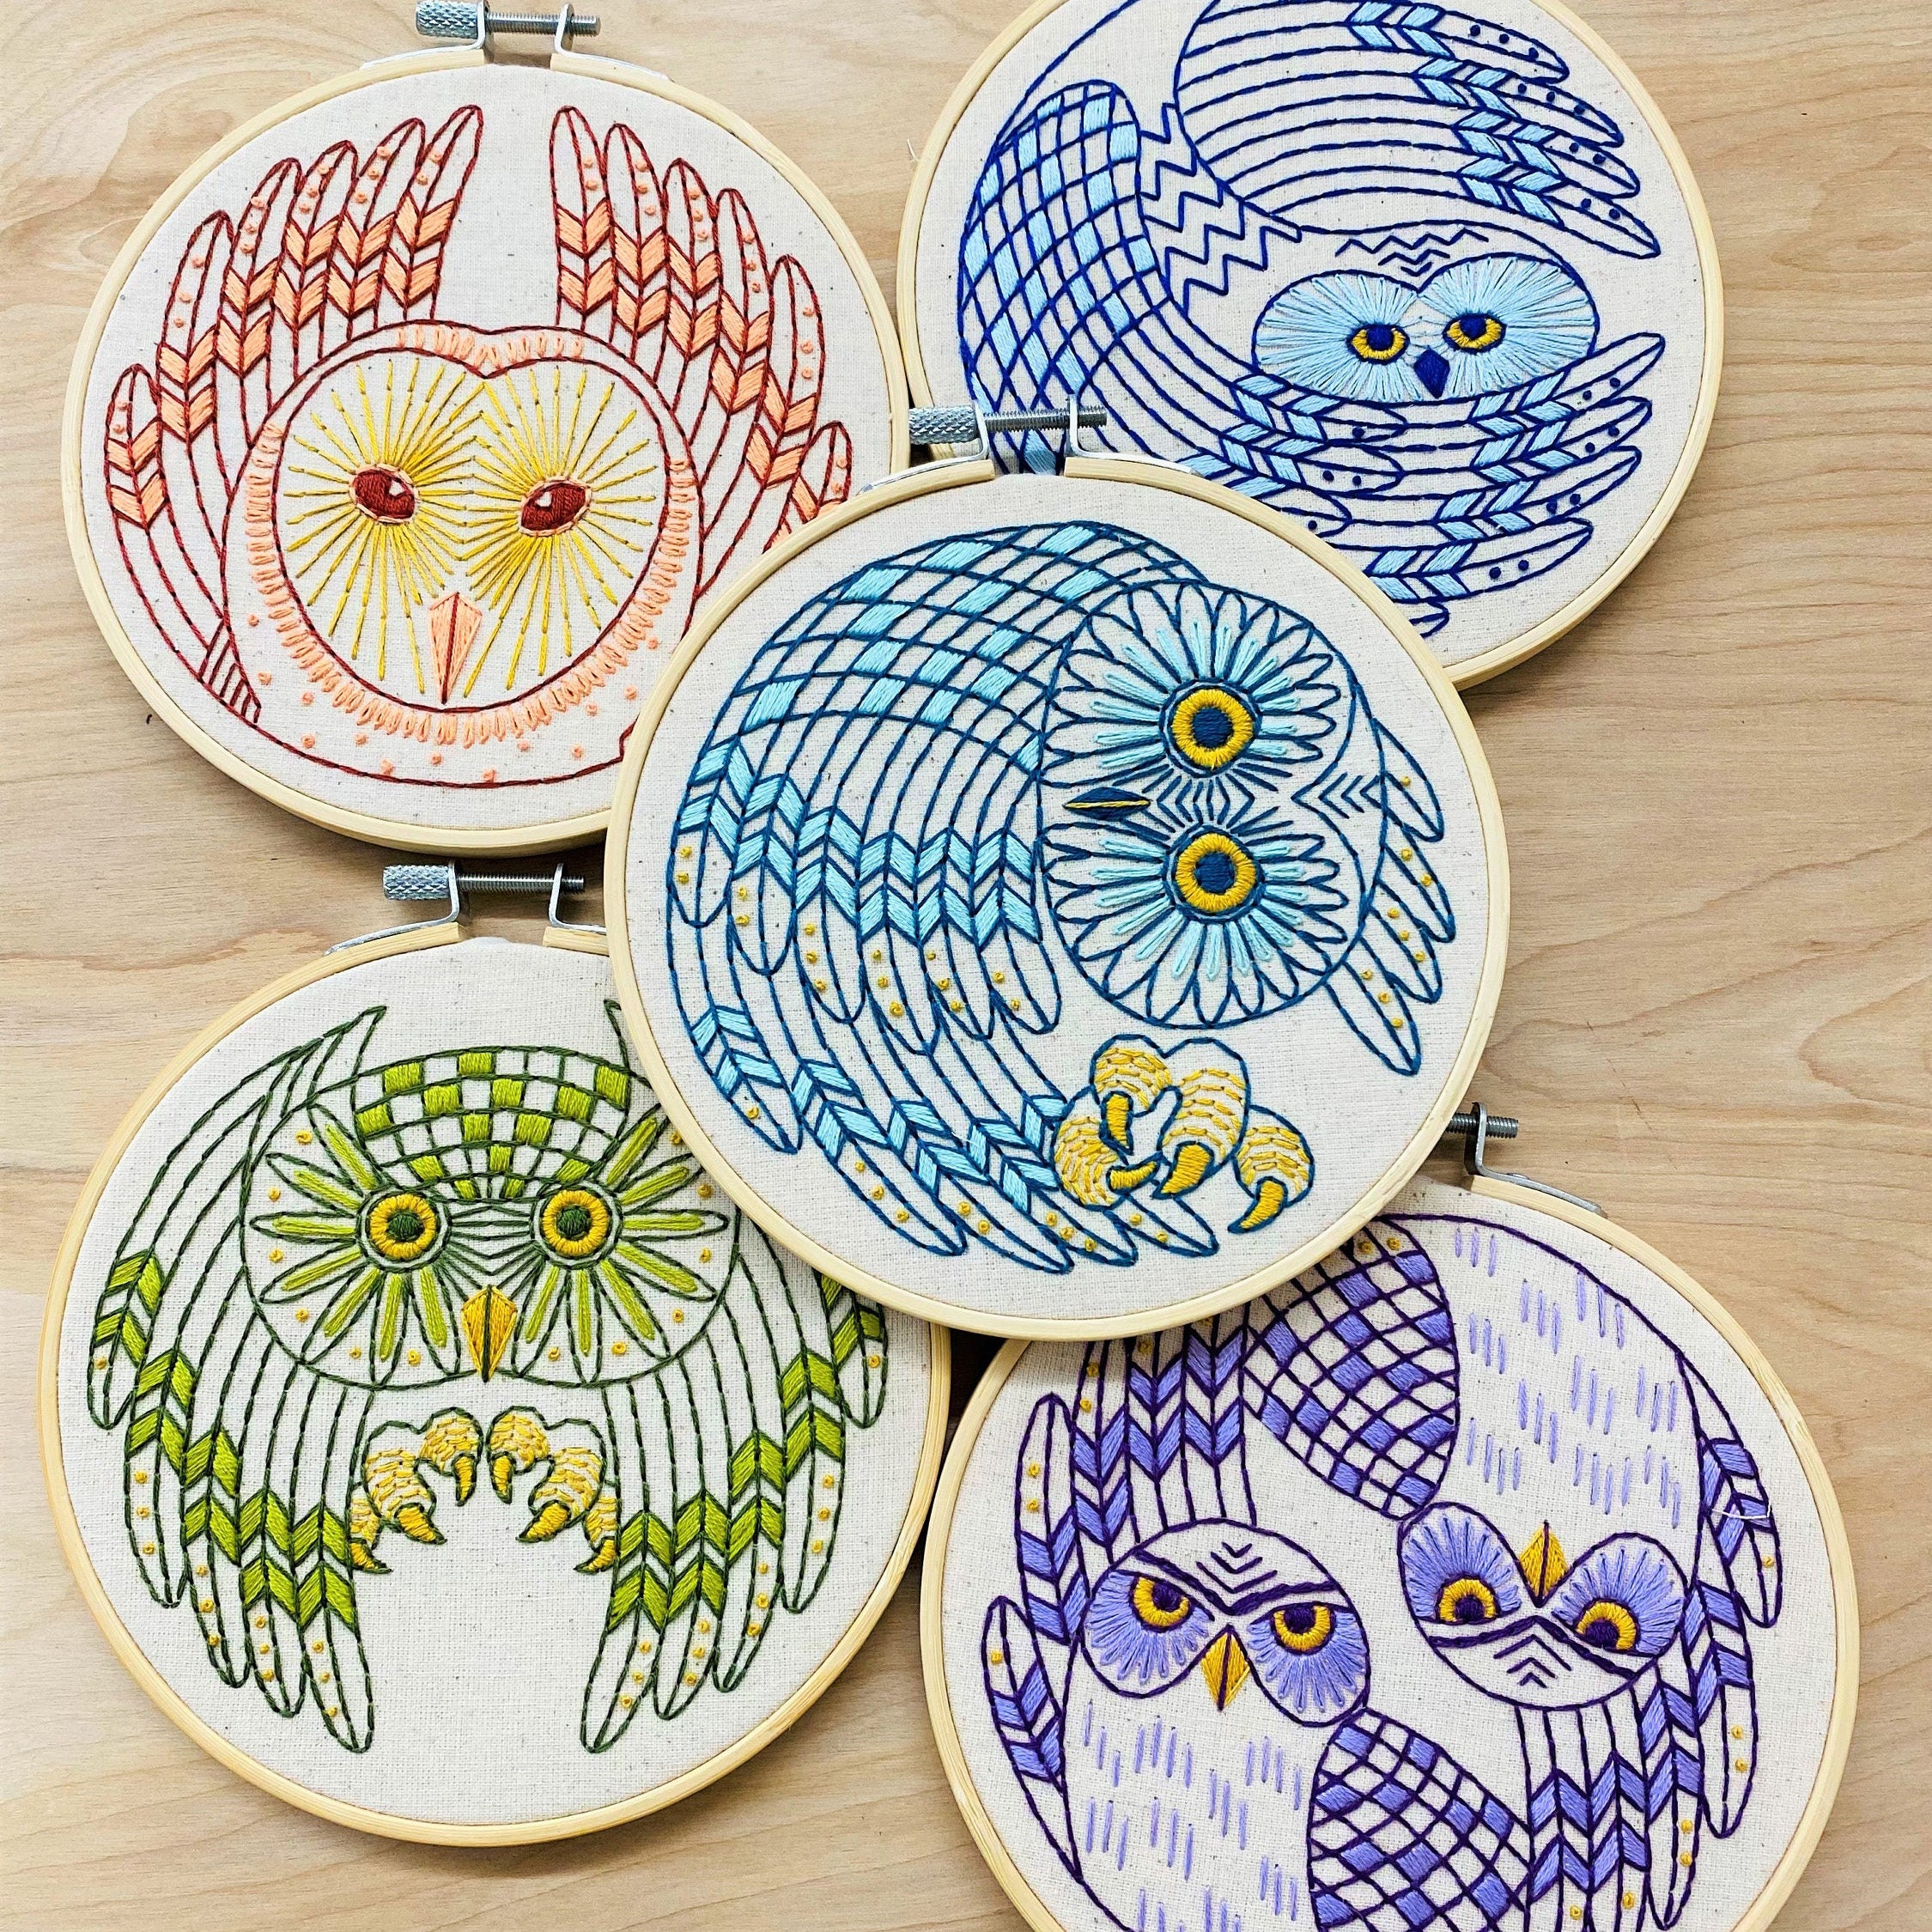 Easy hand embroidery kit, beginner embroidery kit, easy hand embroidery kit  for beginner, owl embroidery pattern, easy owl embroidery kit — I Heart  Stitch Art: Beginner Embroidery Kits + Patterns